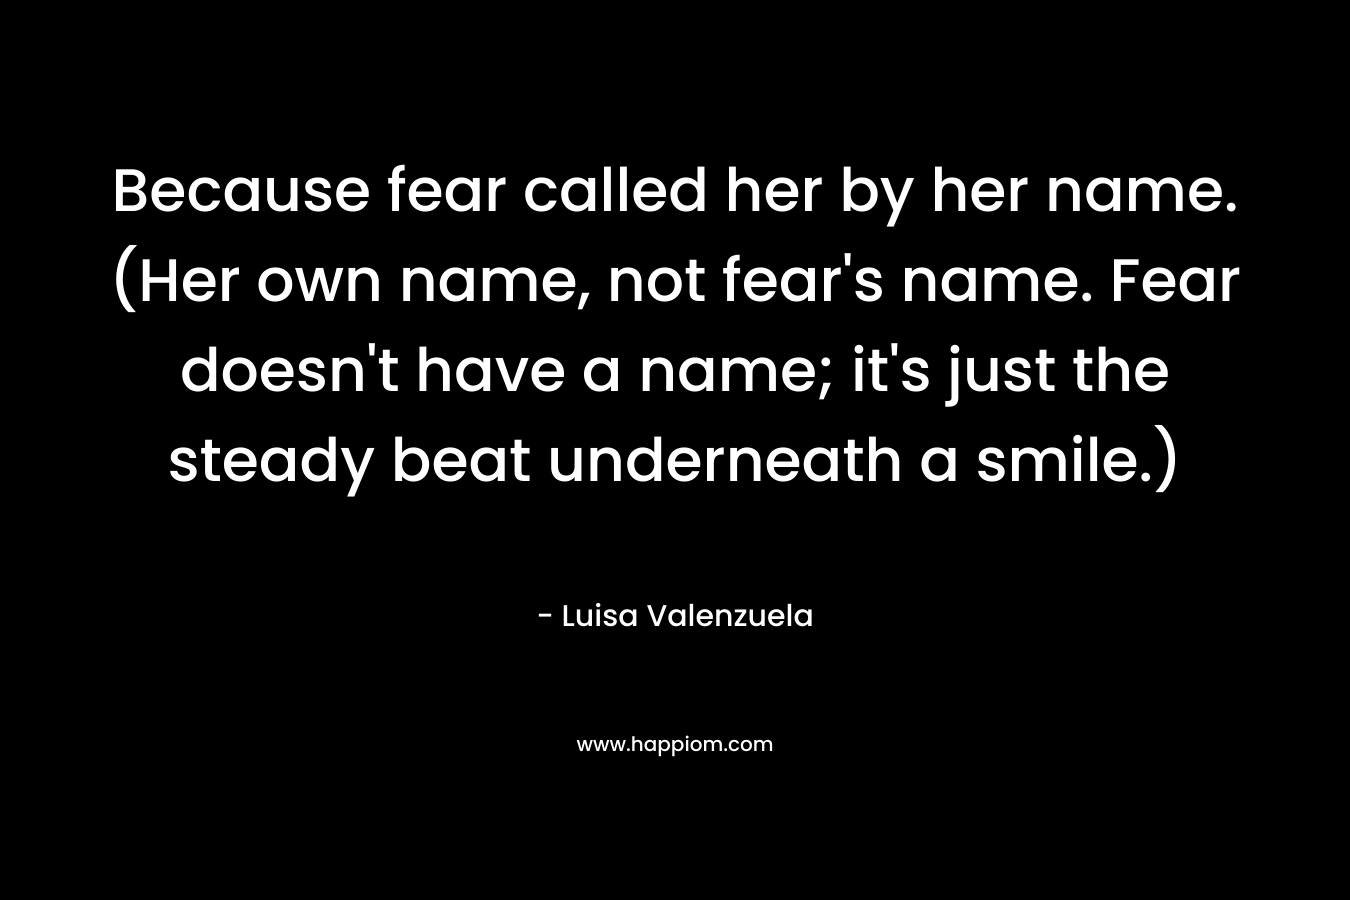 Because fear called her by her name. (Her own name, not fear's name. Fear doesn't have a name; it's just the steady beat underneath a smile.)